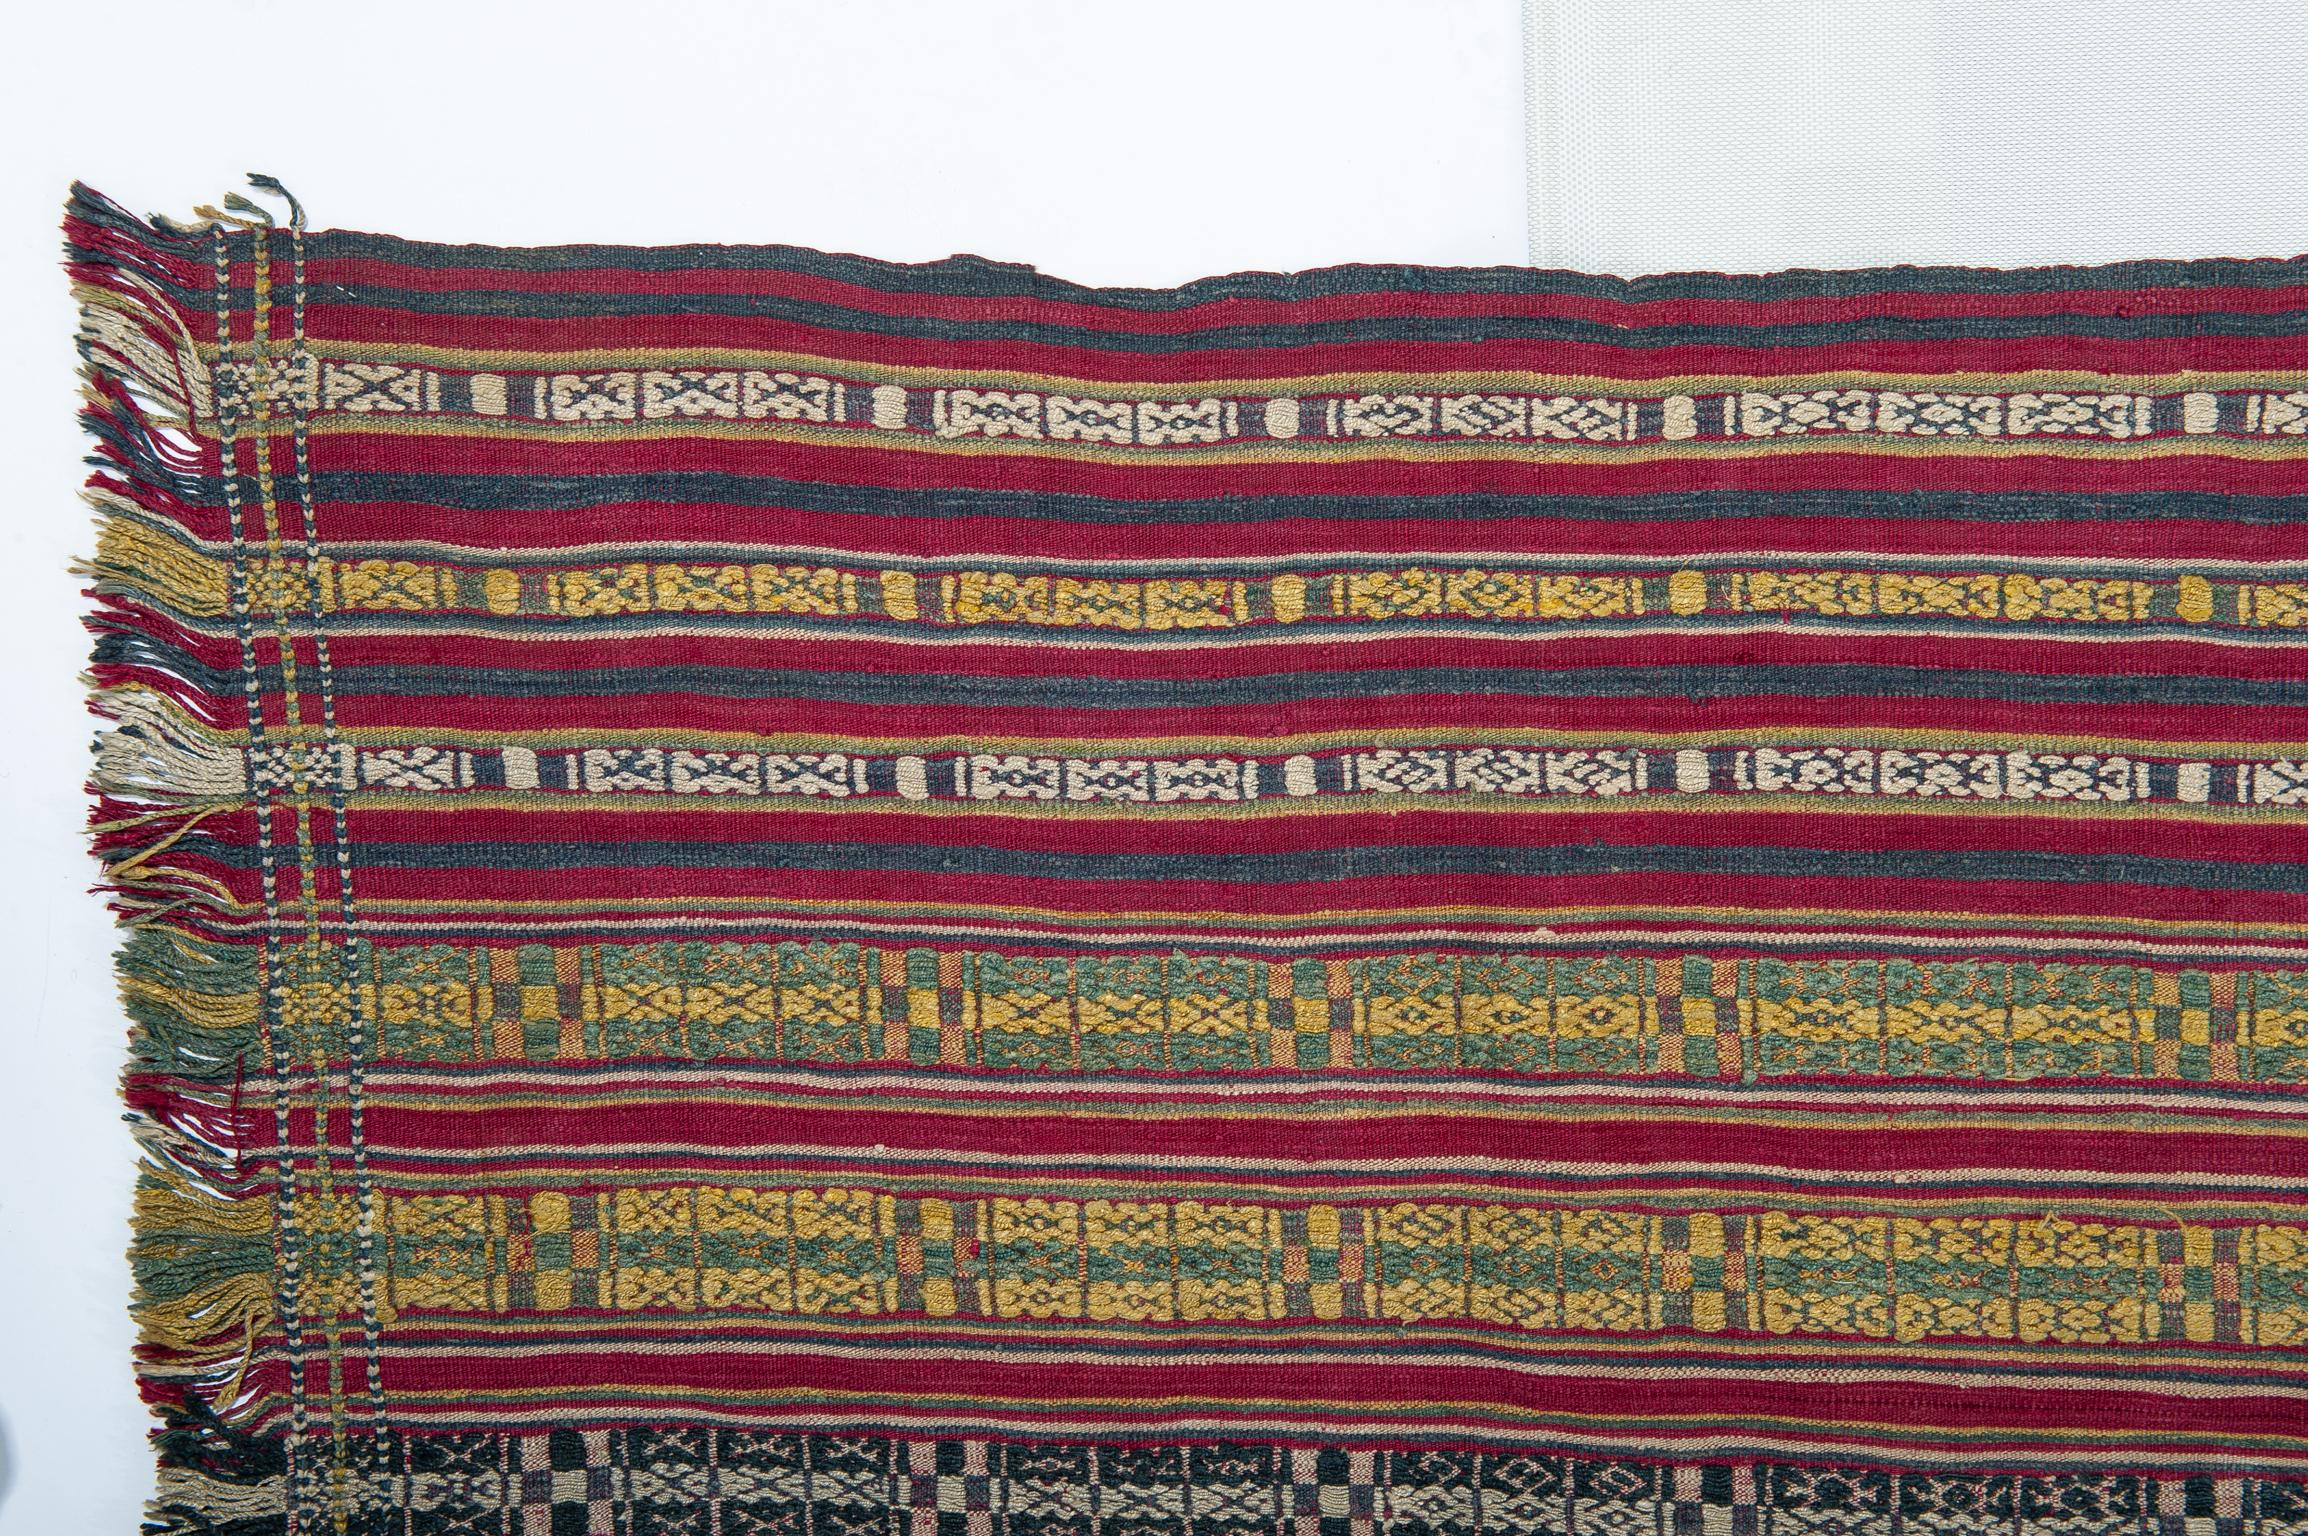 Hand-Woven Tissue or Shawl from Nagaland For Sale